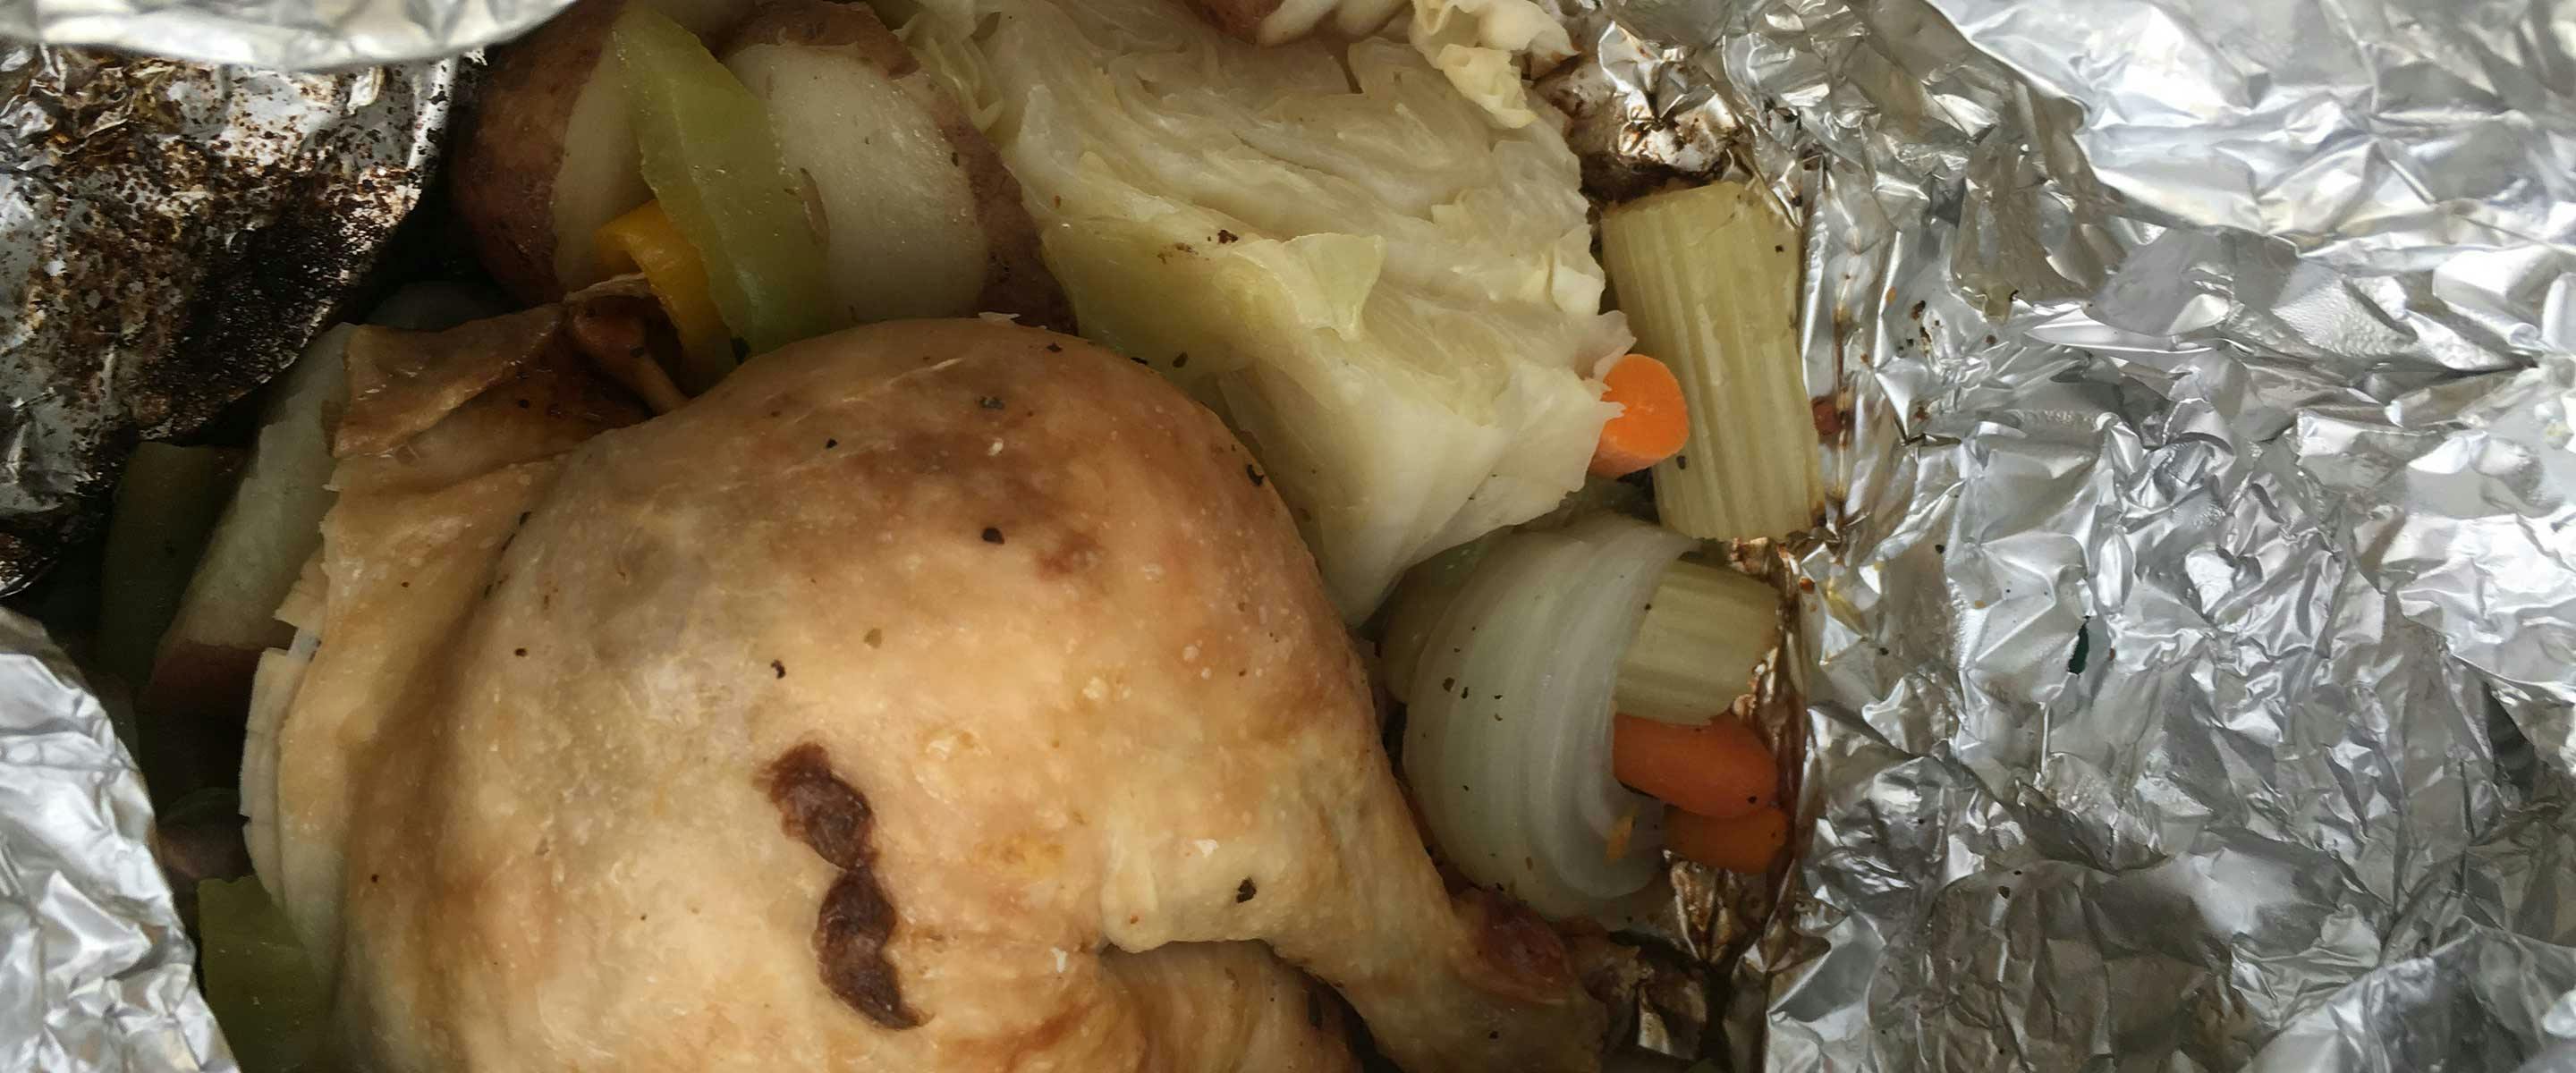 chick and onion and other vegetables roasting over a fire in aluminum foil